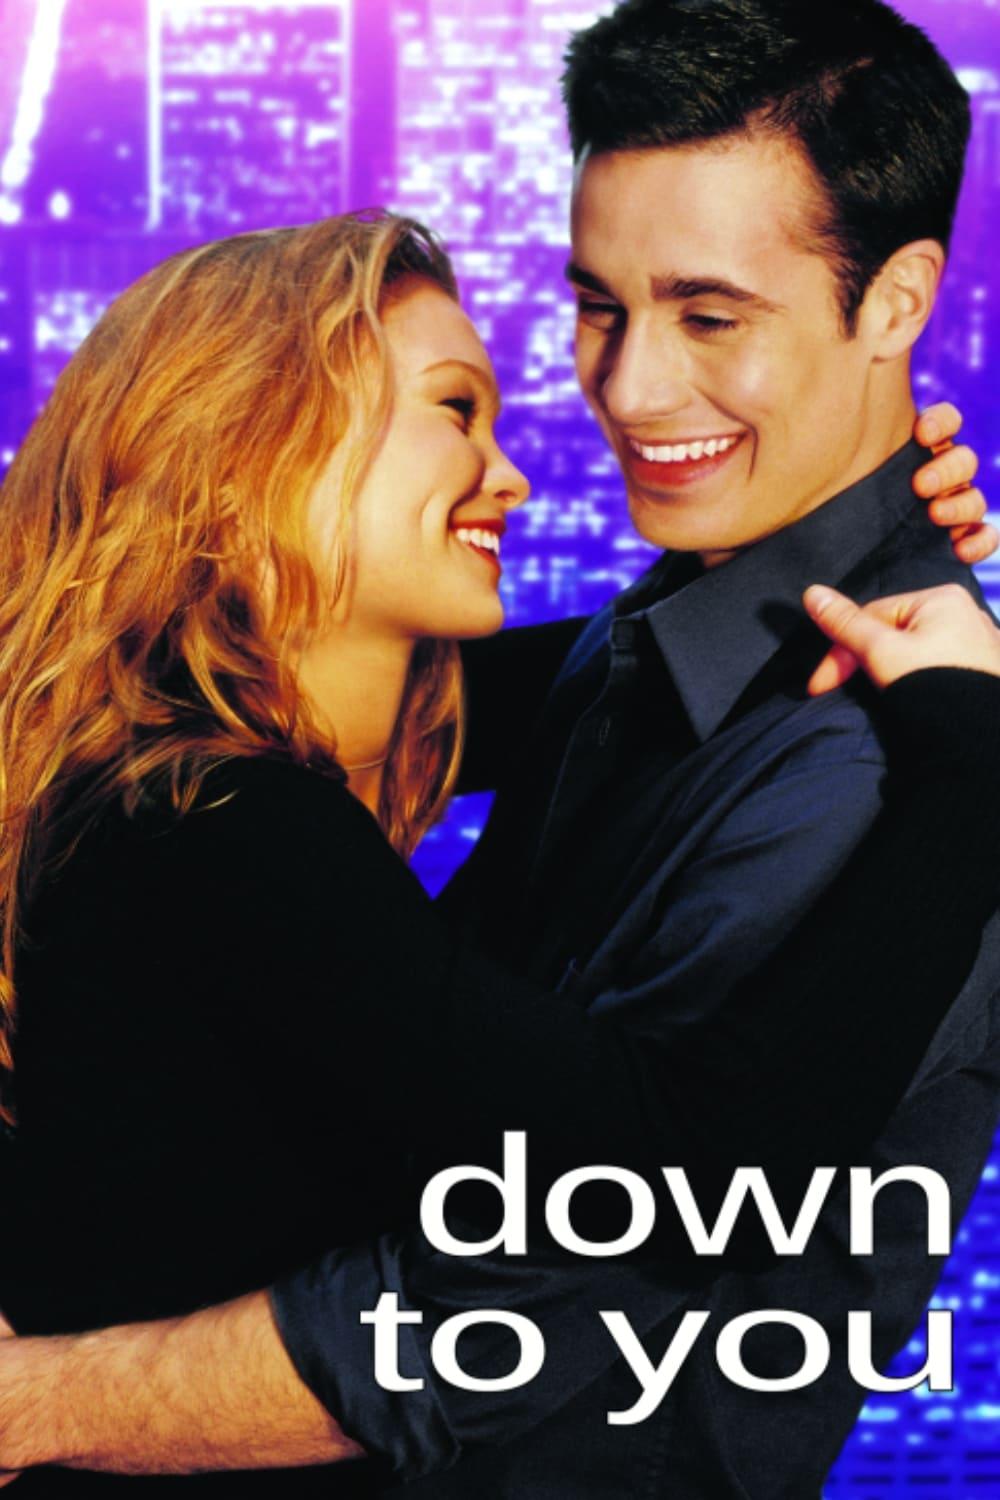 Down to You poster